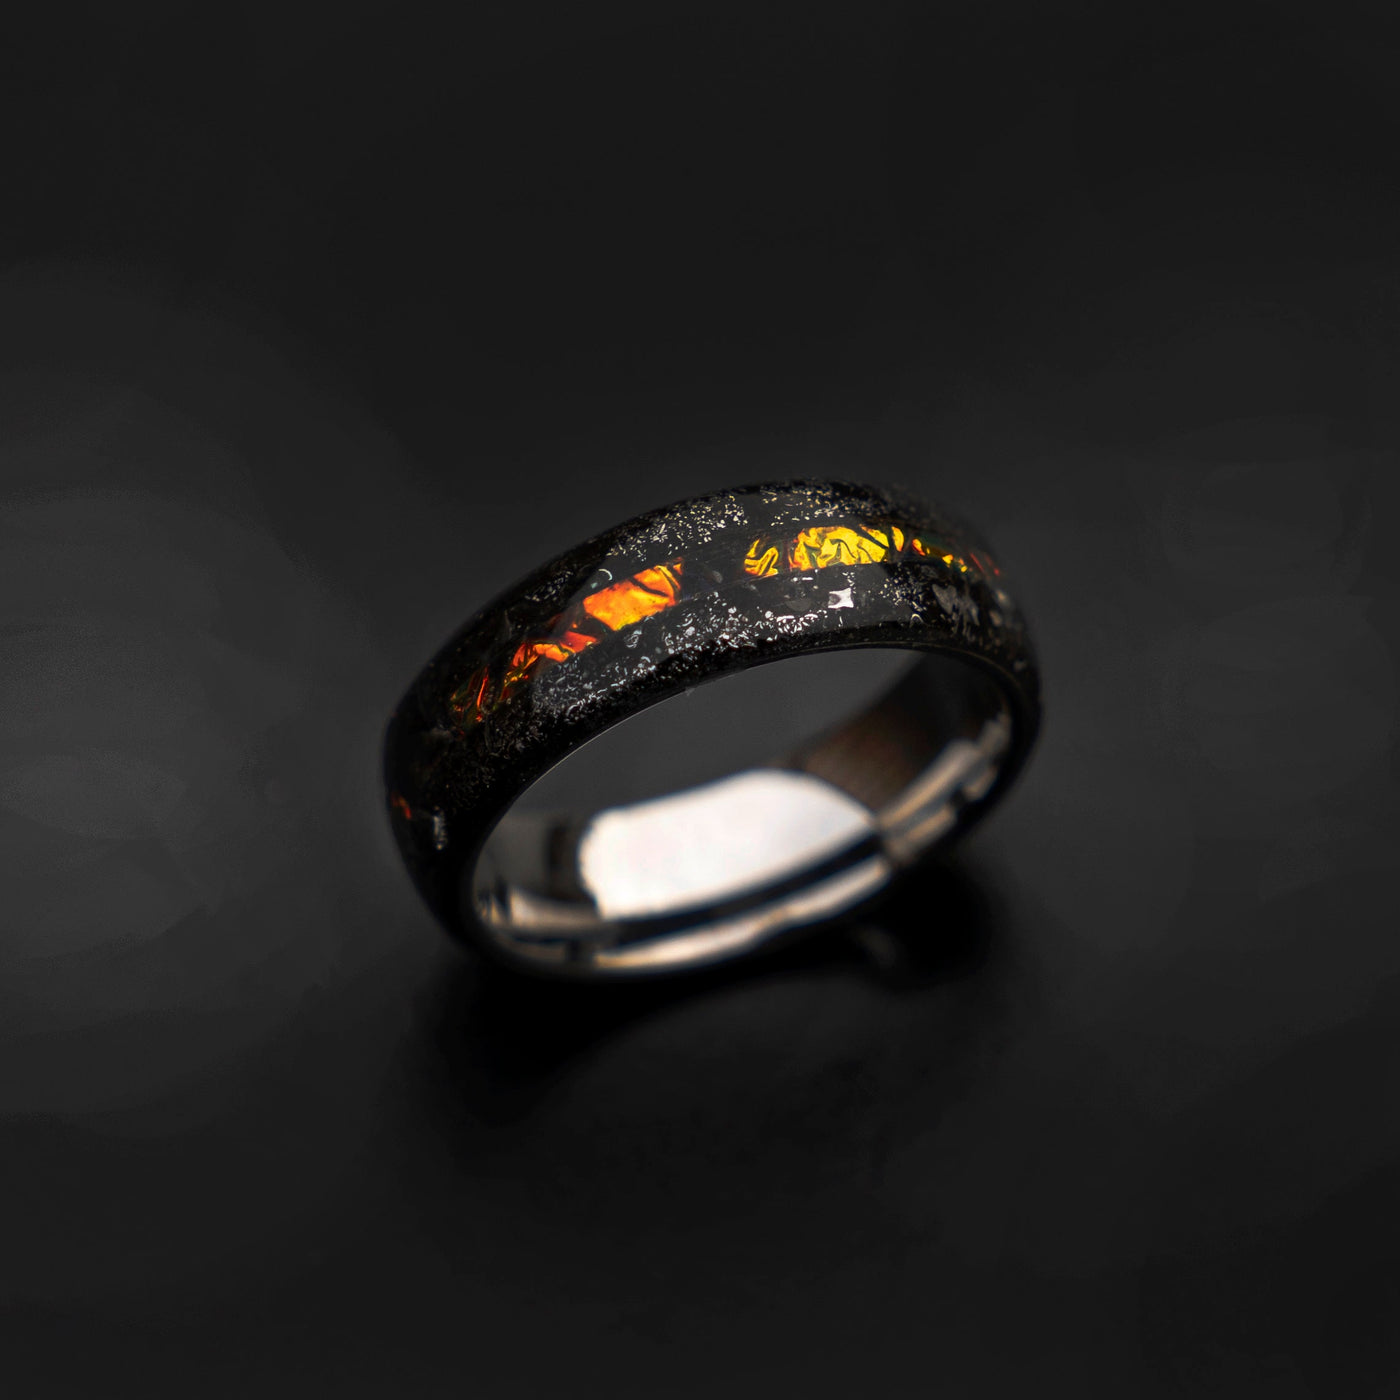 Couples rings with Muonionalusta meteorite shavings tungsten ring with Dichrolam galaxy inlay, mens wedding band, meteorite ring.